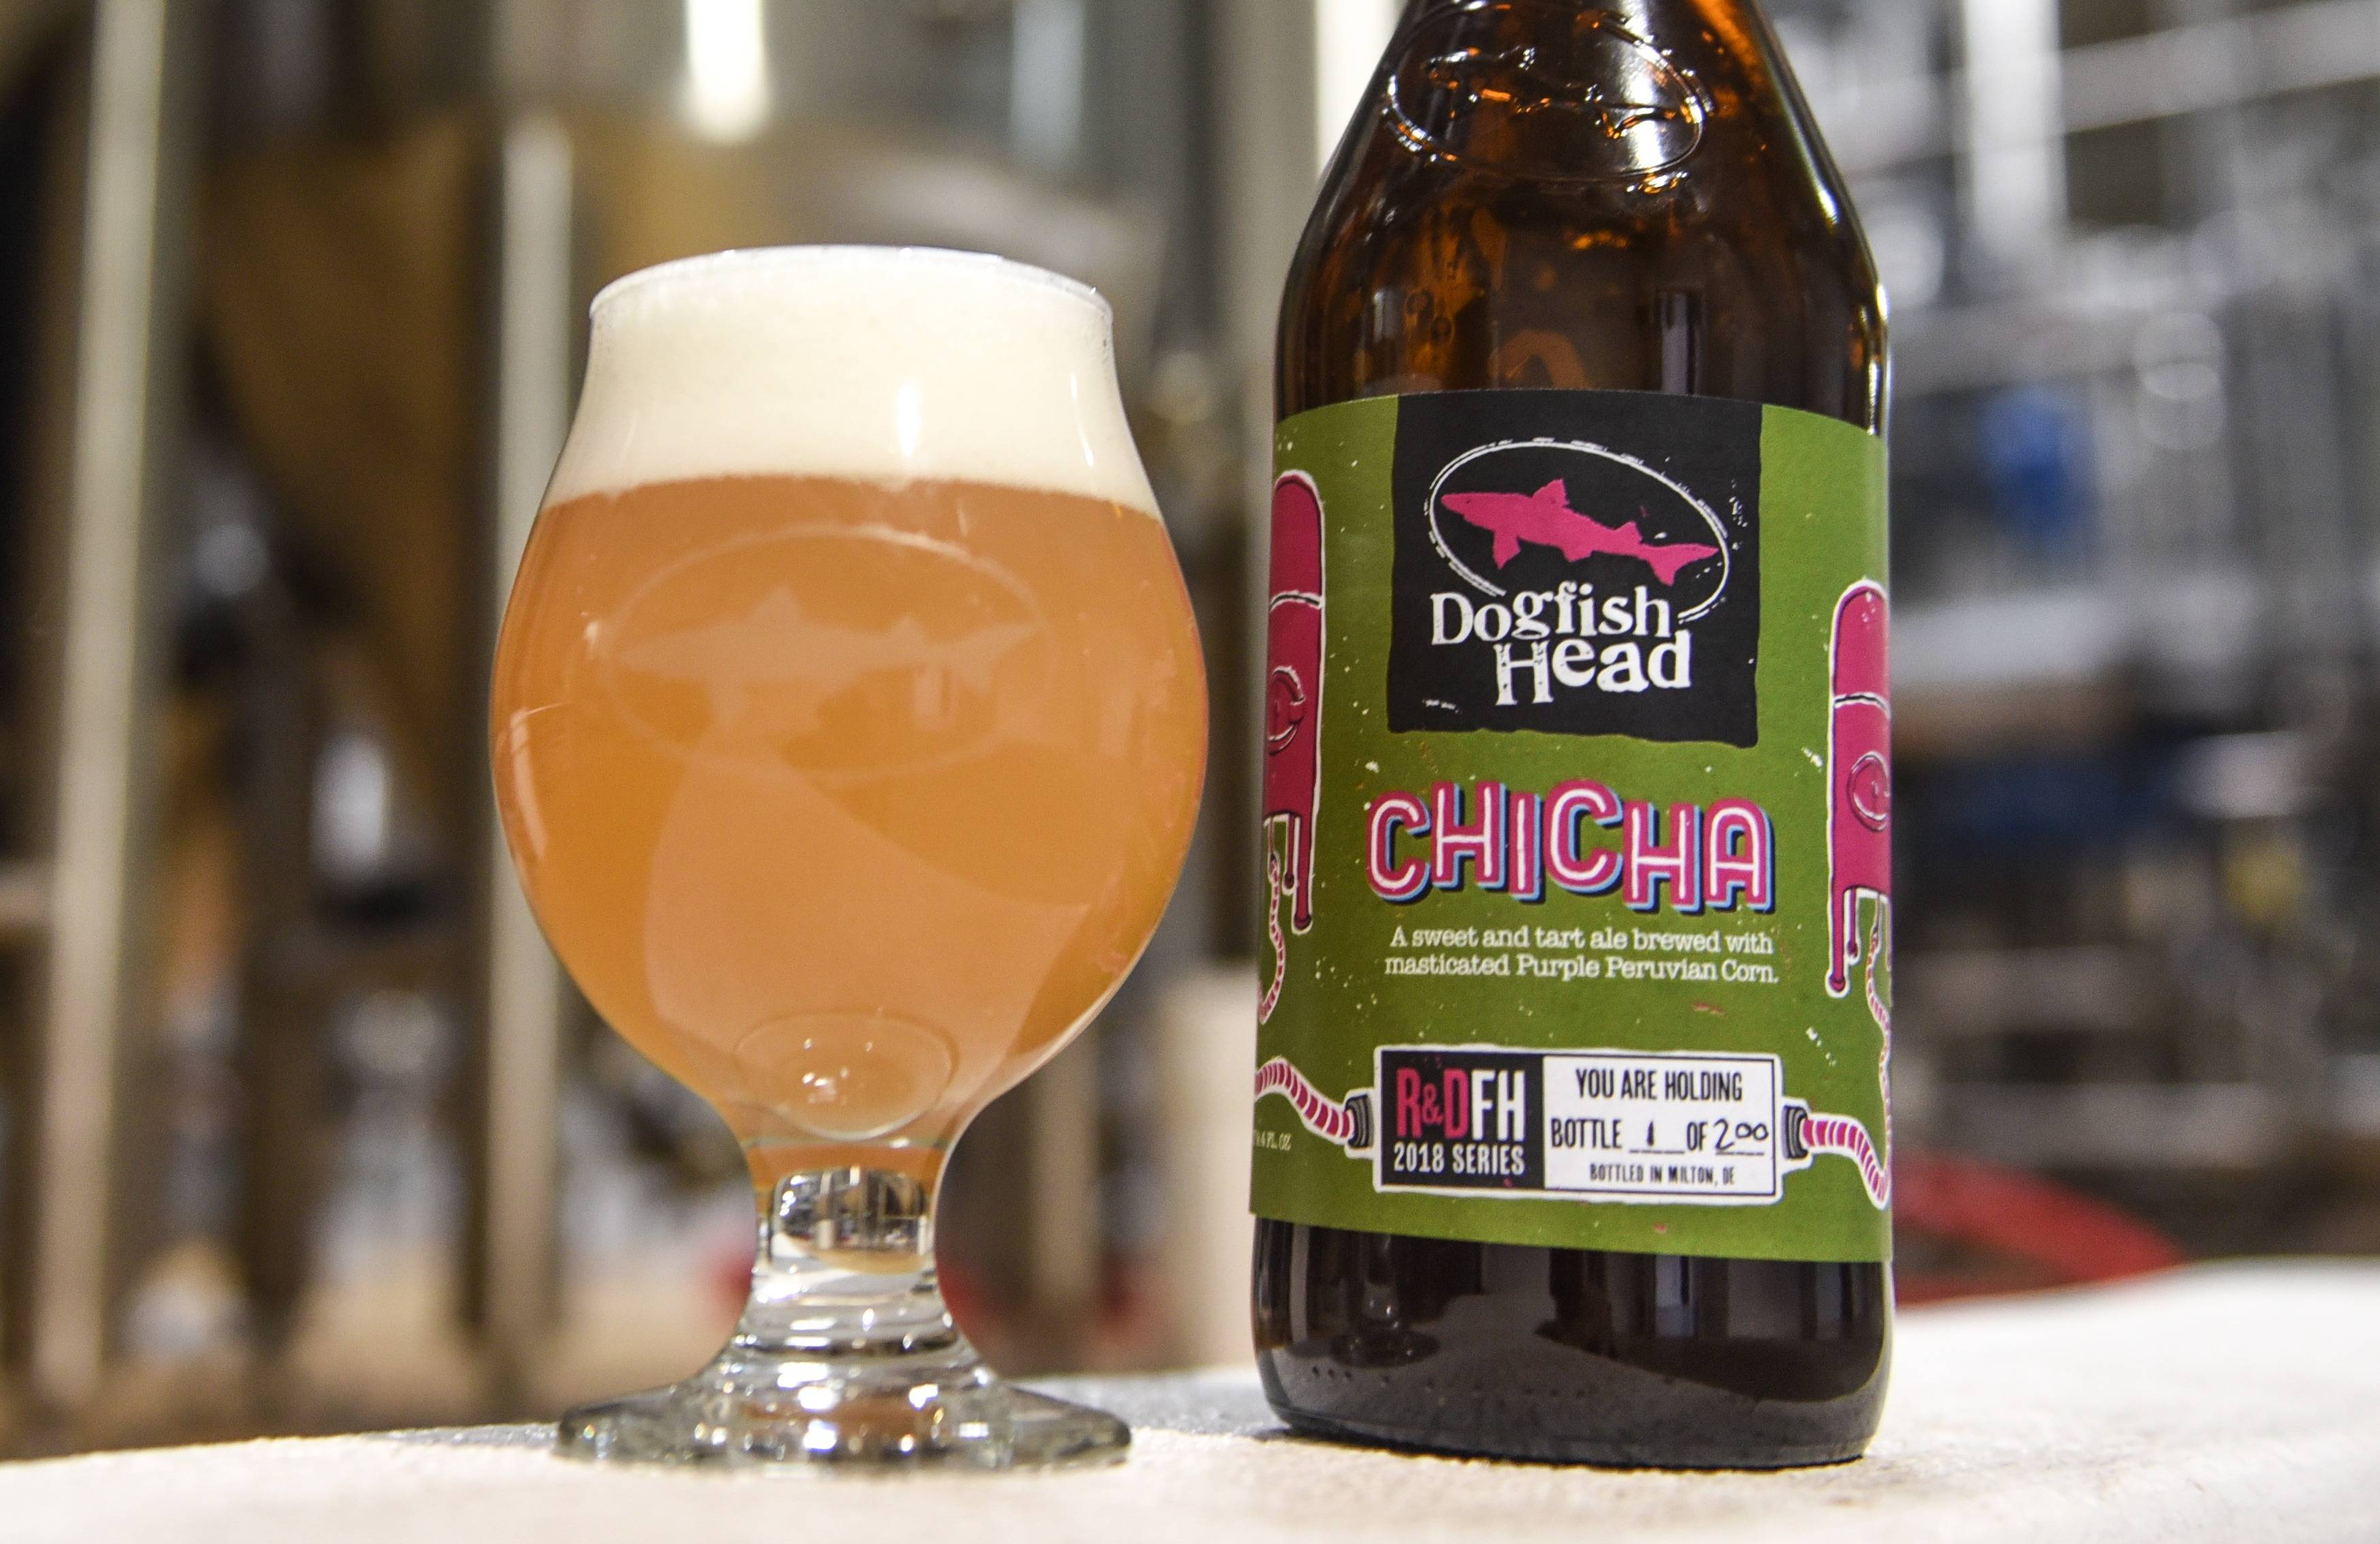 Chicha - South American beer